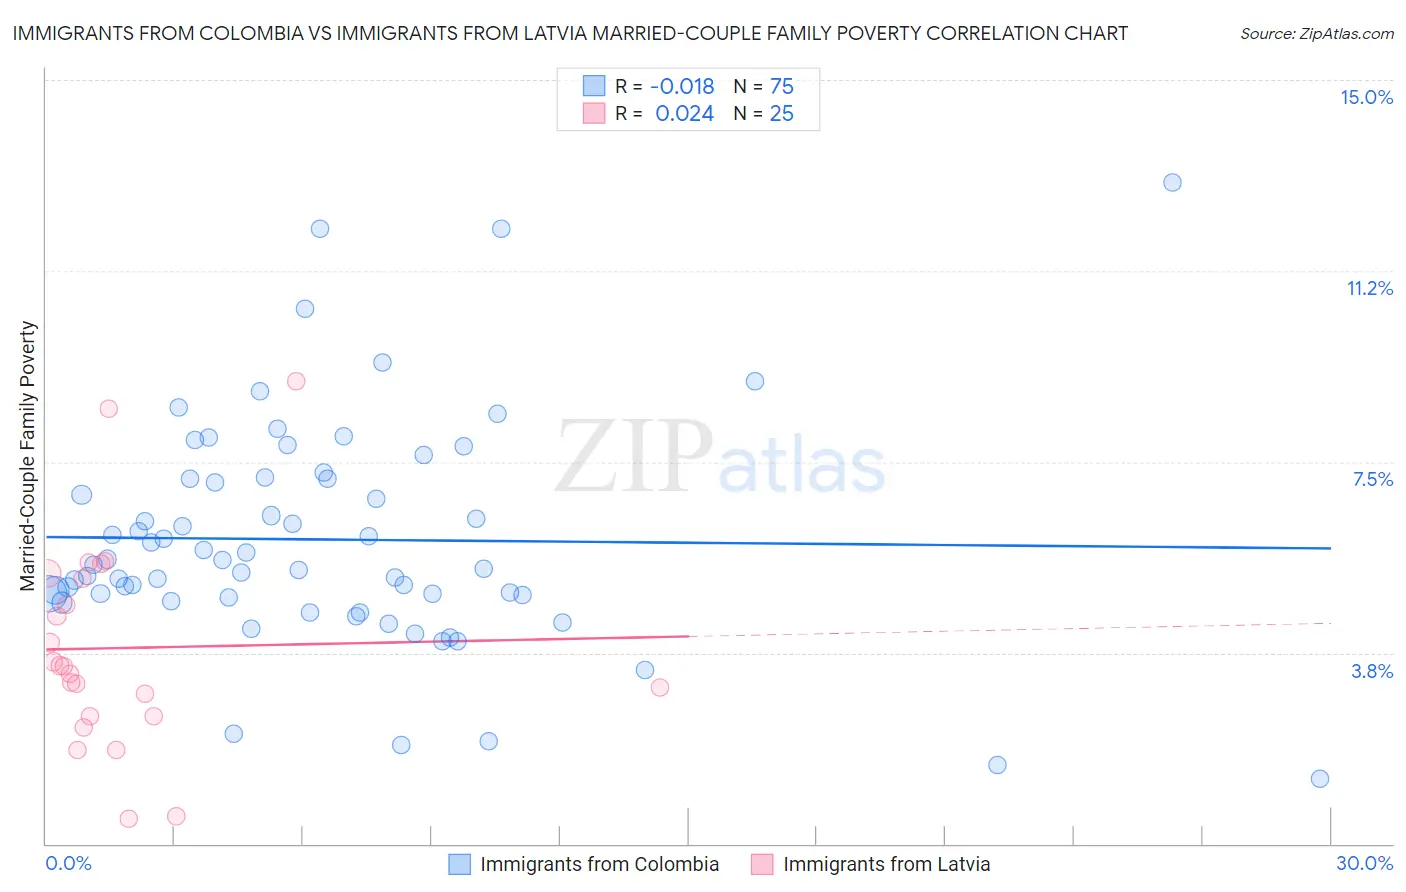 Immigrants from Colombia vs Immigrants from Latvia Married-Couple Family Poverty